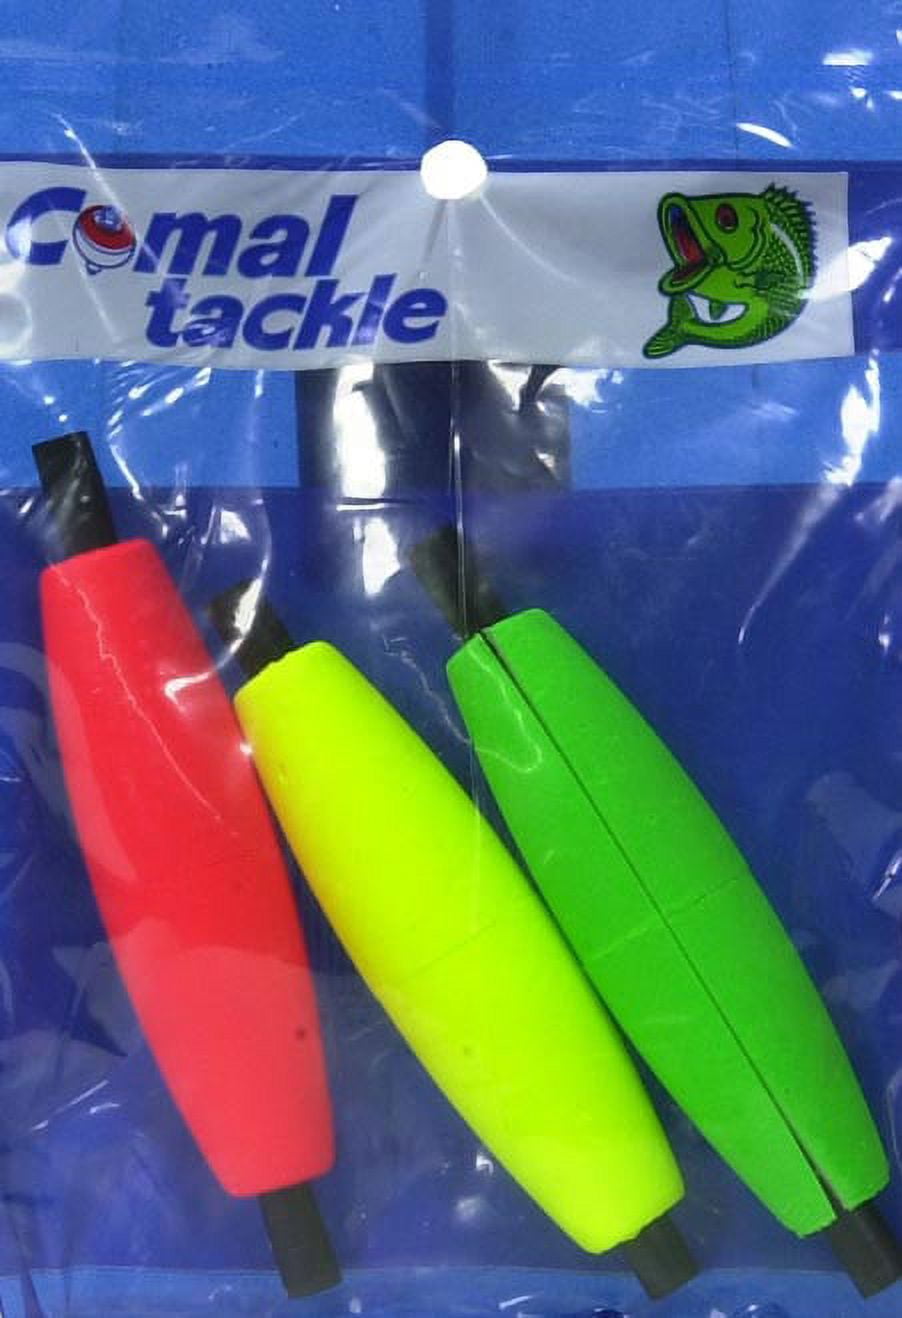 Comal Tackle Assorted Cigar Float W/Peg 4 Per Pack 2.5 - Fishing Accessory